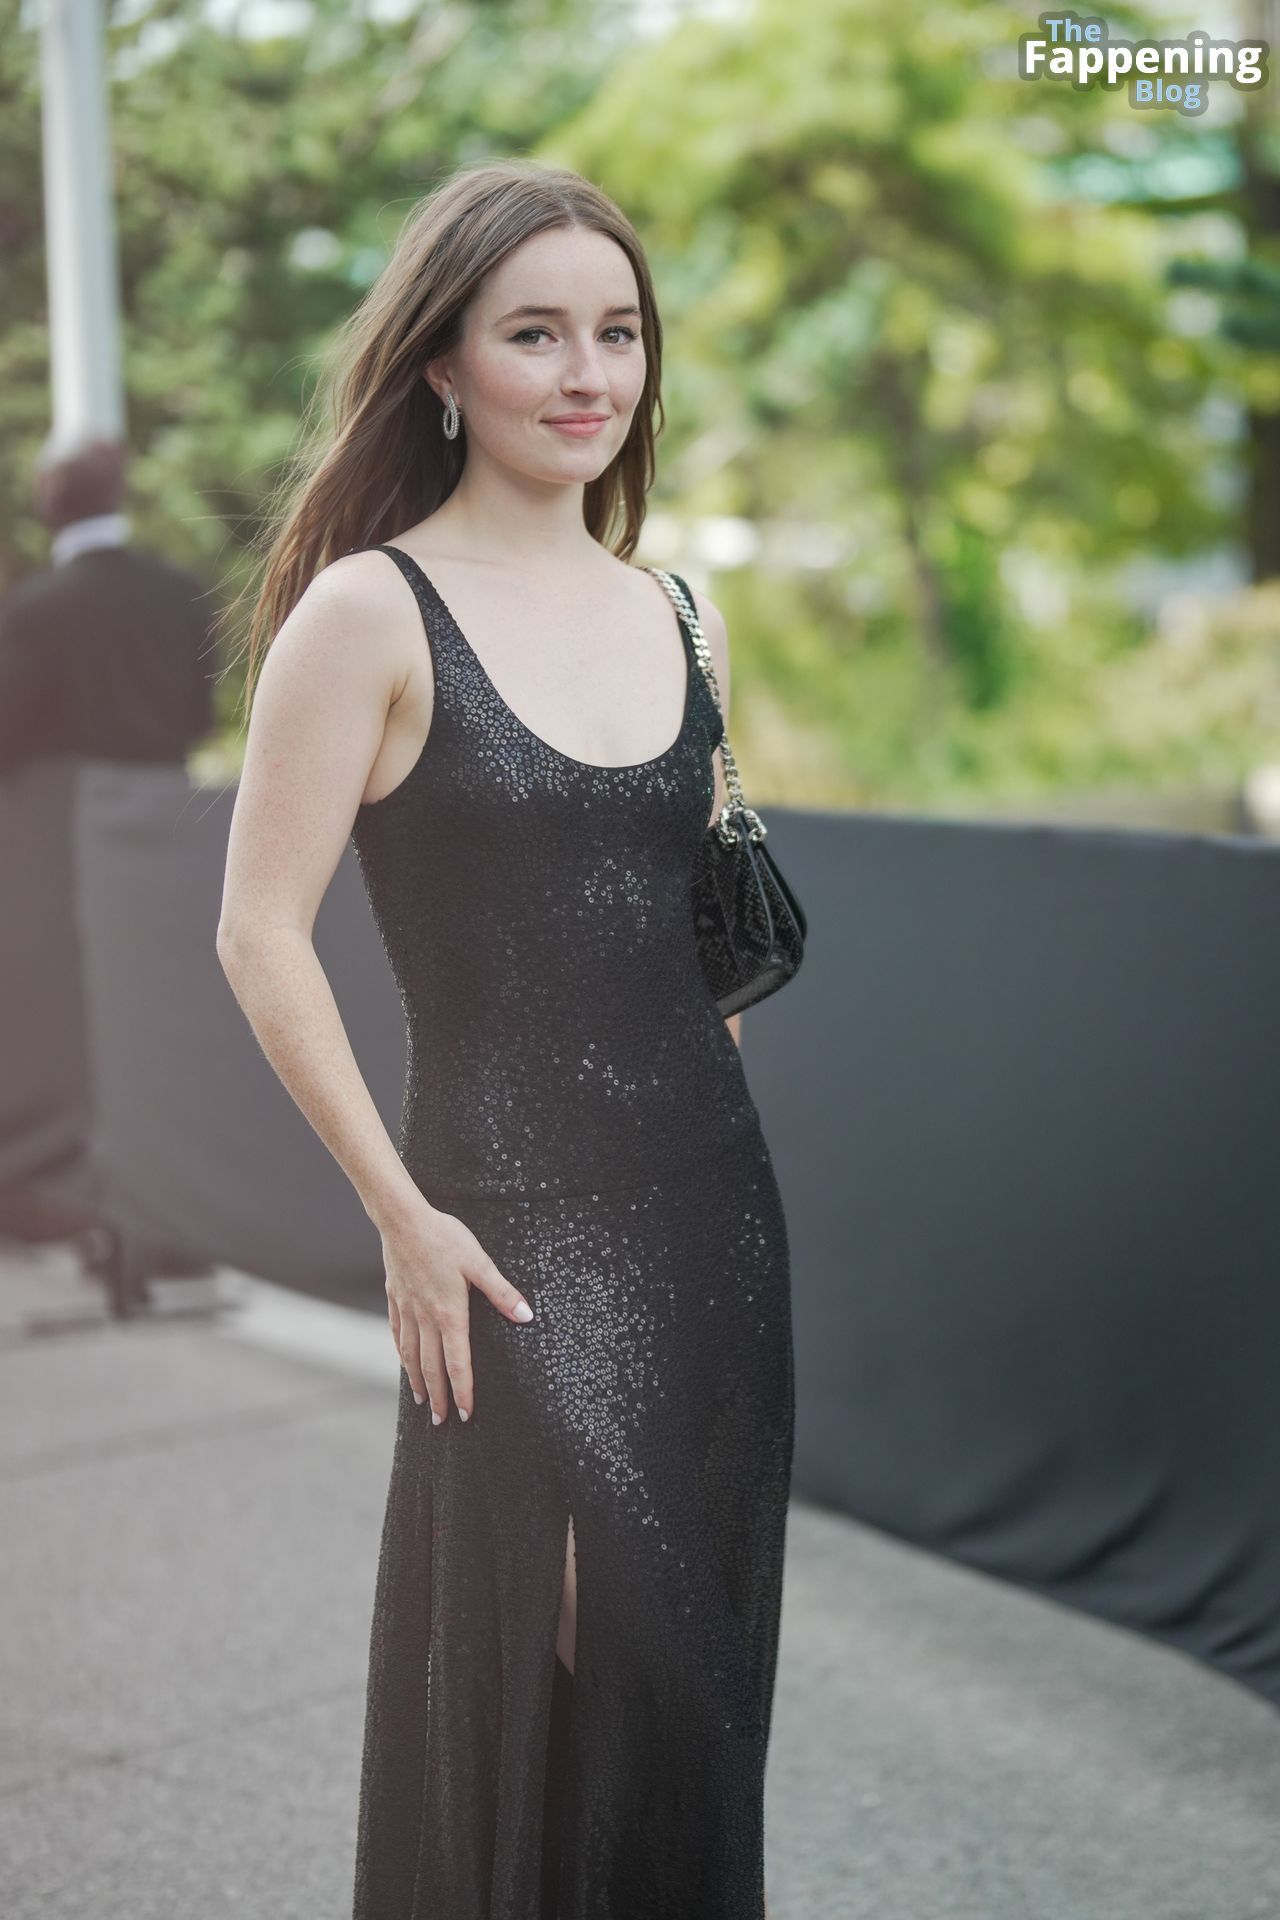 Kaitlyn-Dever-Sexy-7-The-Fappening-Blog.jpg